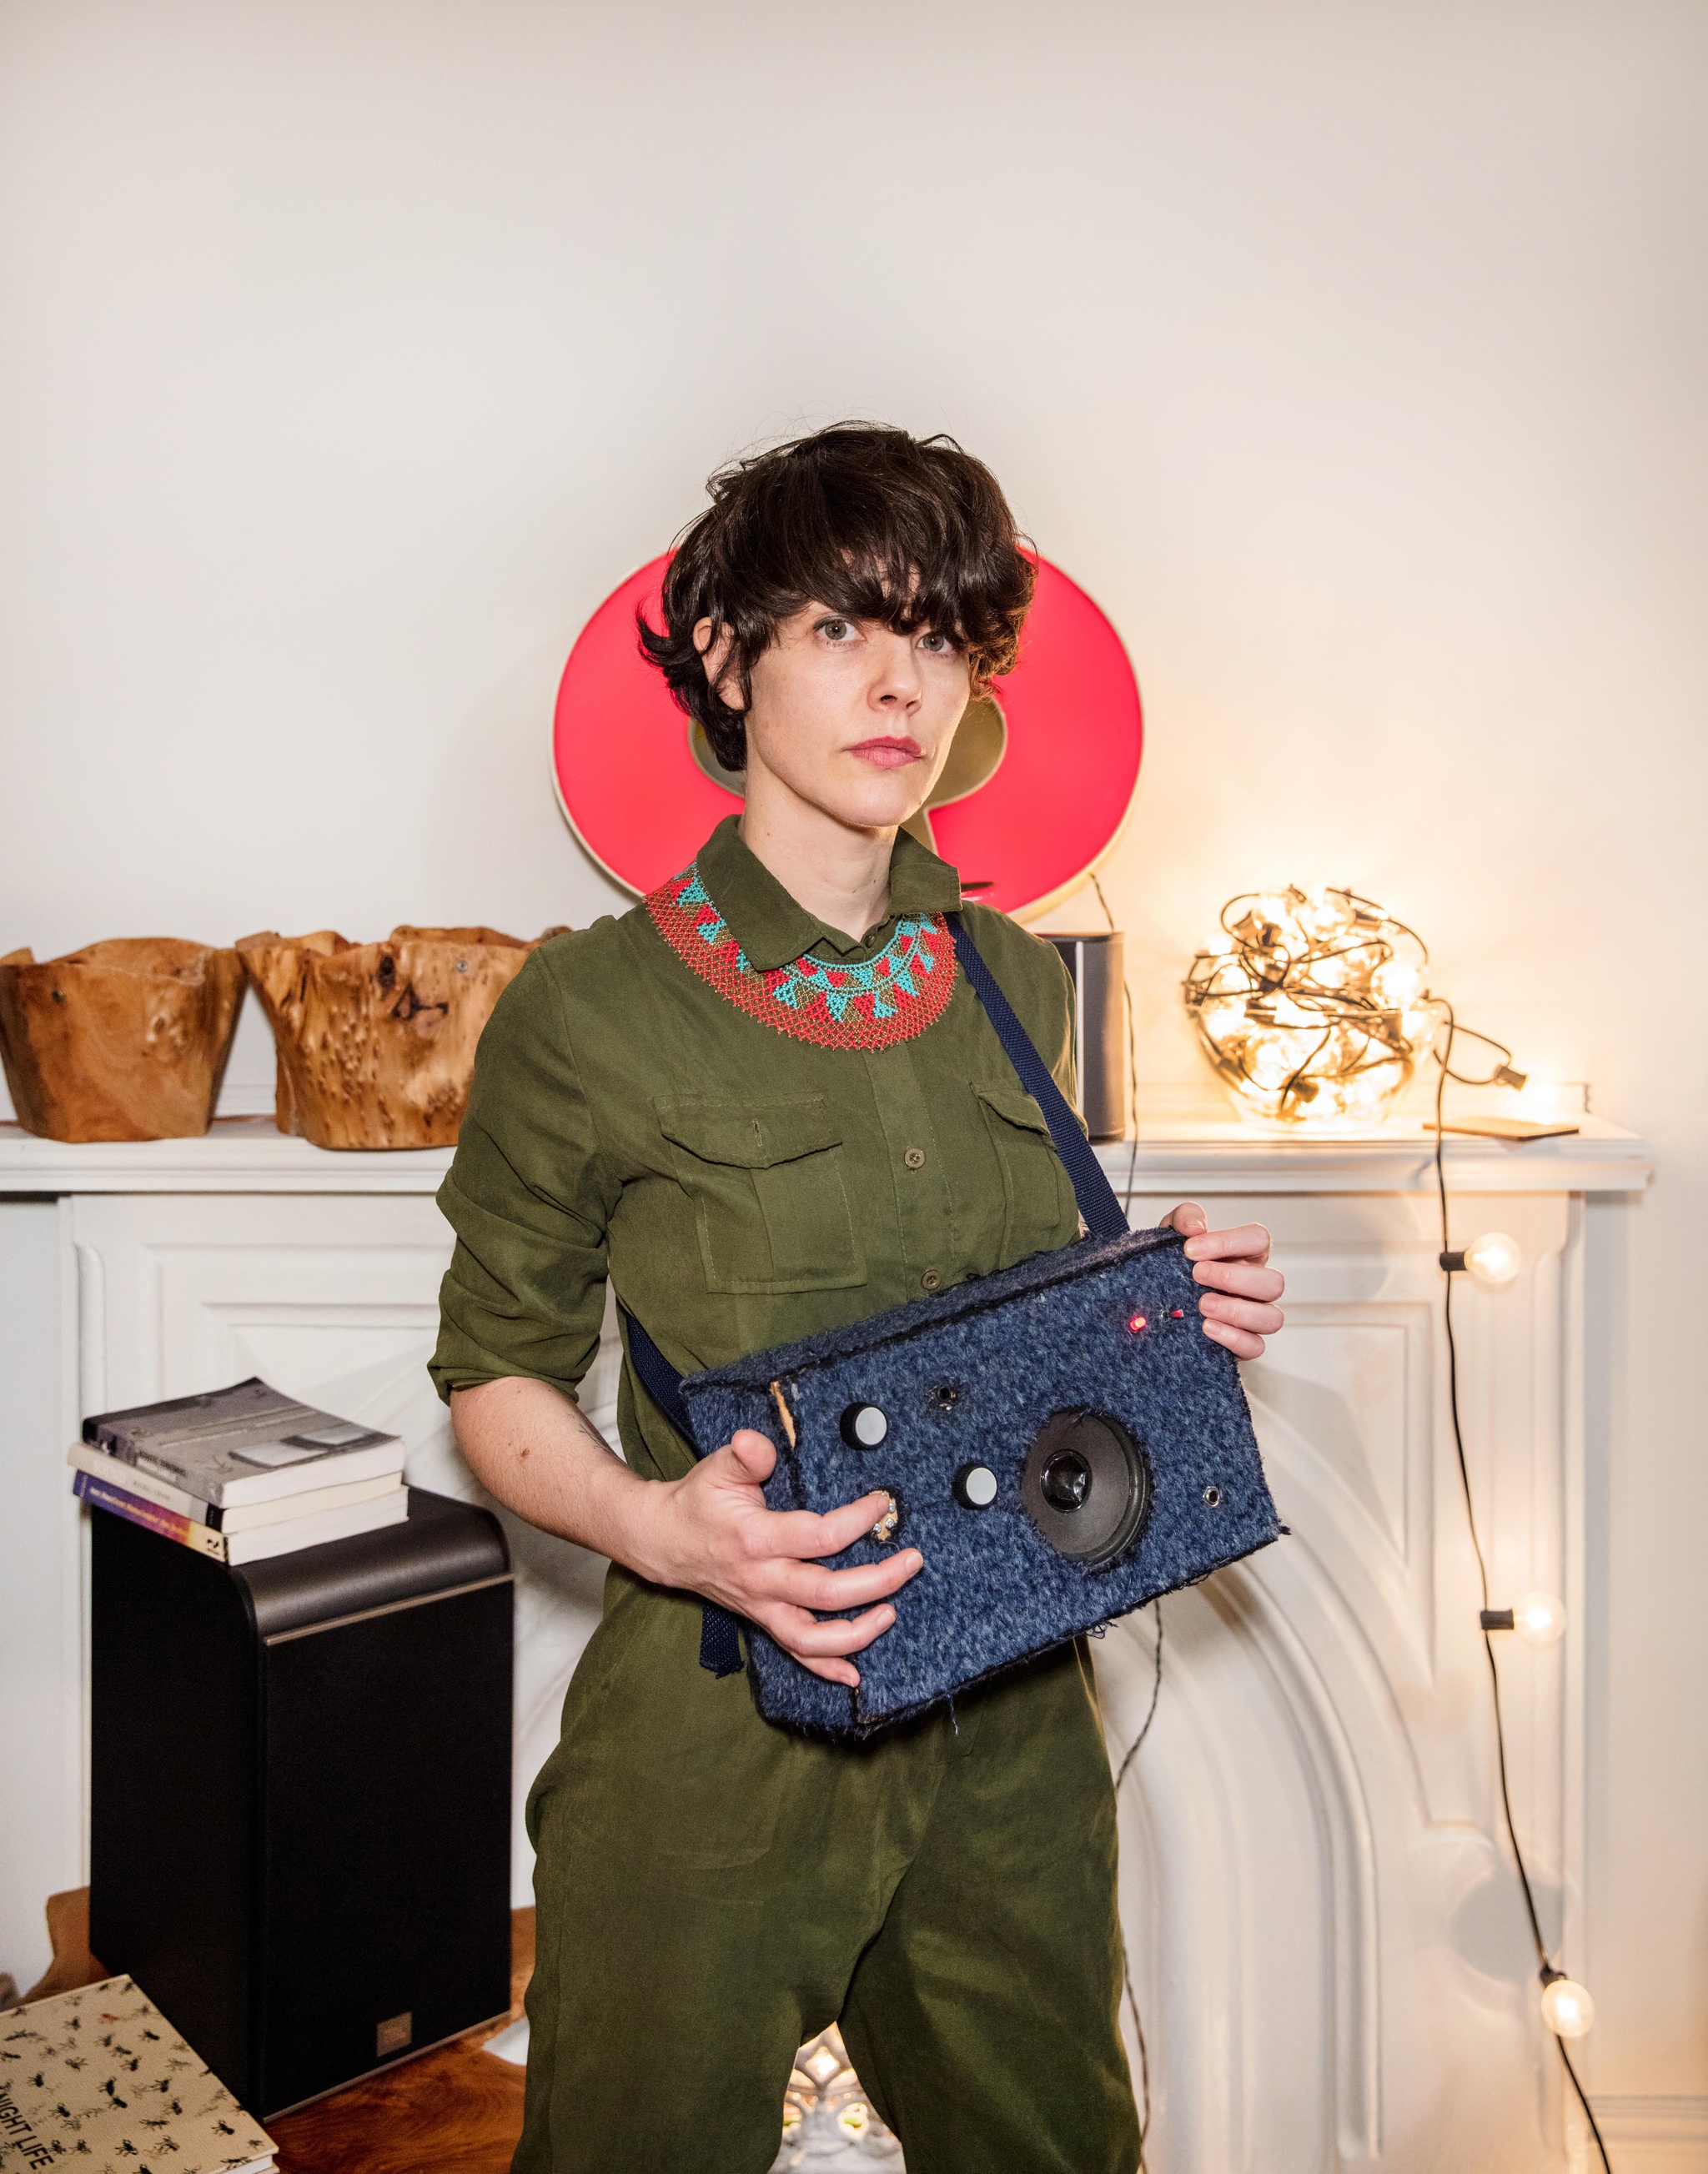 A photo of the artist Merche Blasco who holds a speaker strapped around her torso, with a tangle of string lights in the background on a mantle. 